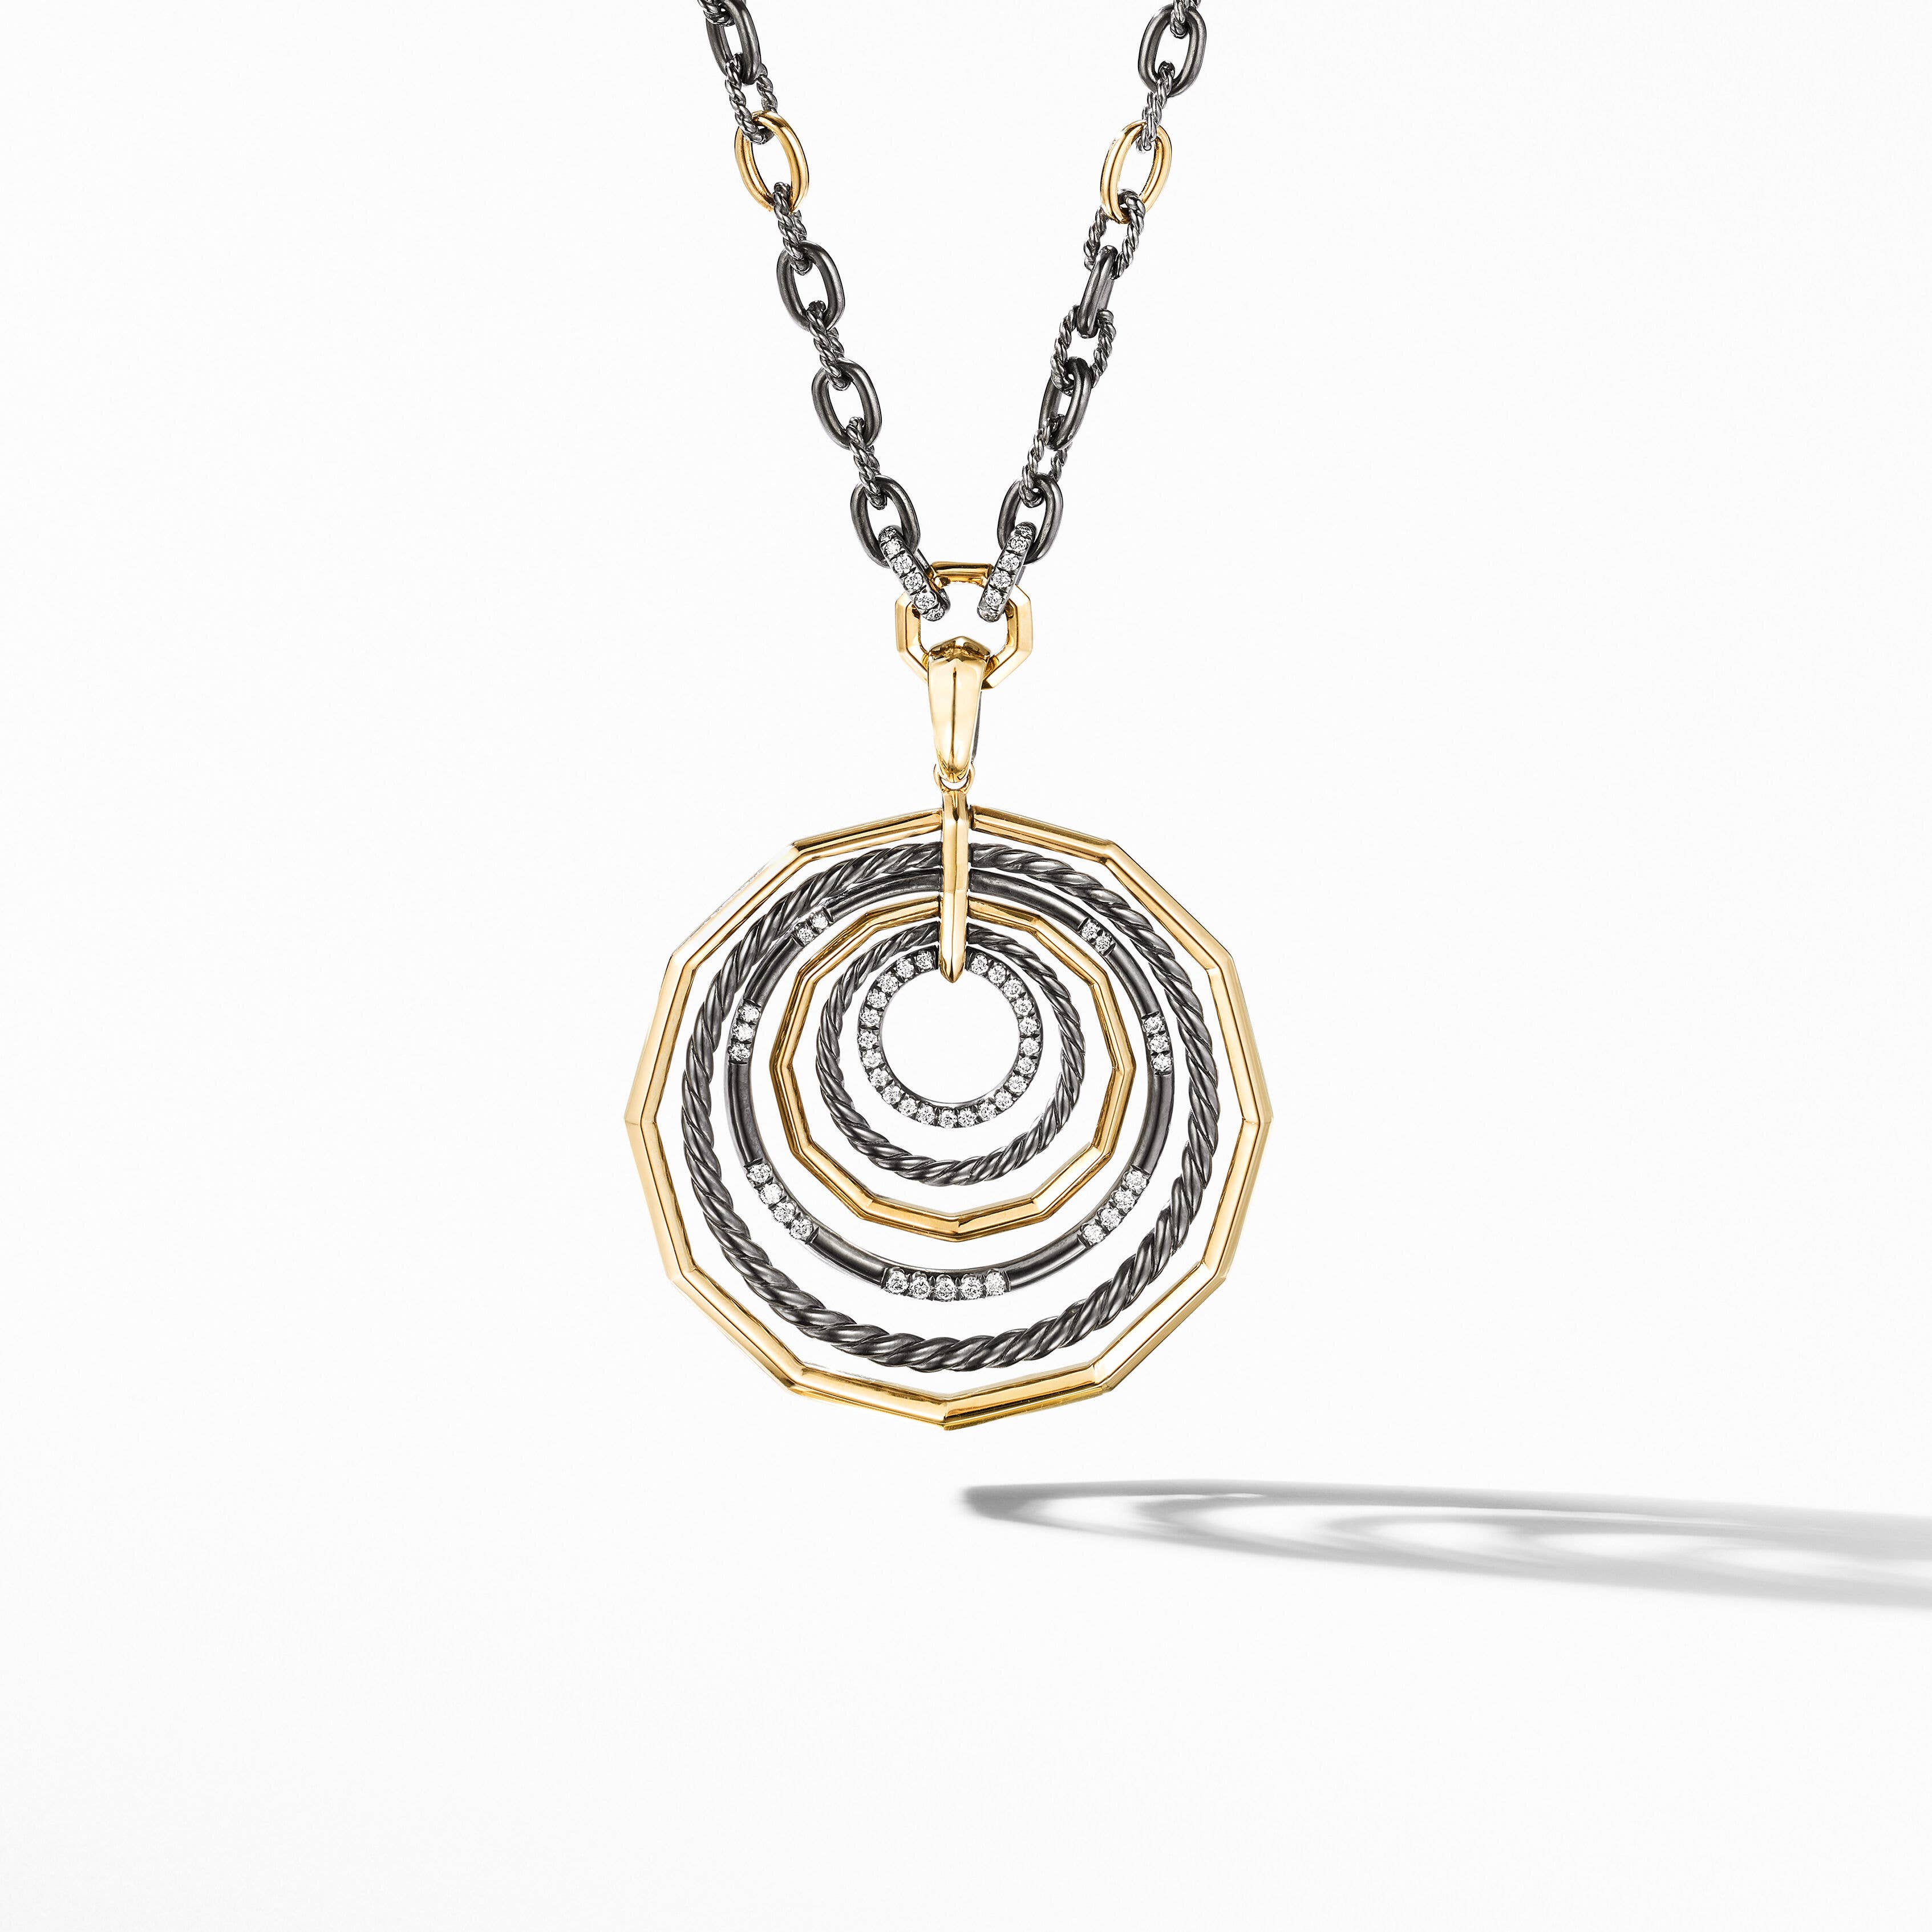 Stax Pendant Necklace in Blackened Silver with 18K Yellow Gold and Pavé Diamonds